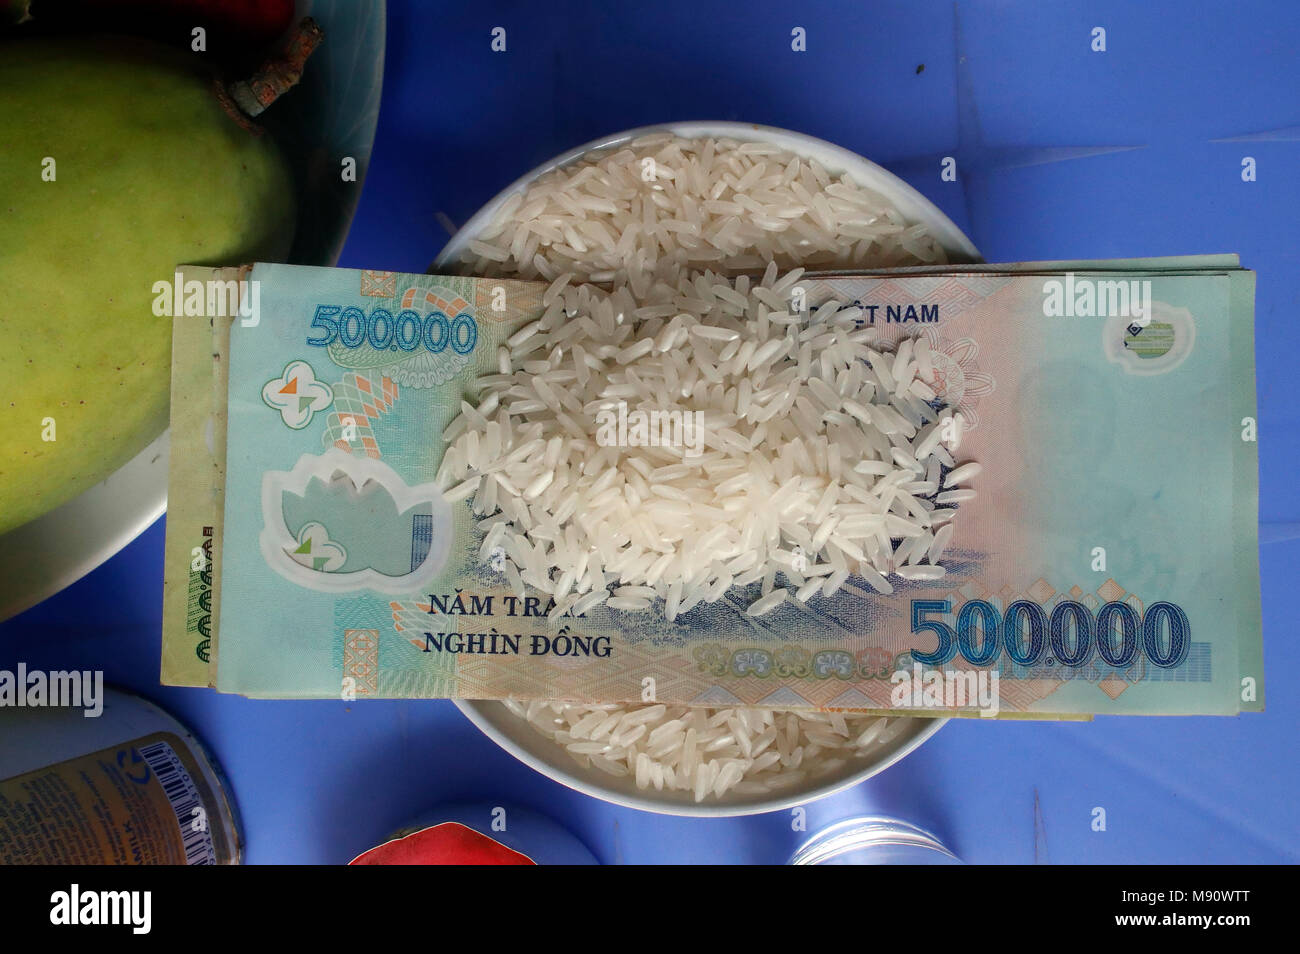 Buudhist offerings. Rice and bank note.  Ho Chi Minh City. Vietnam. Stock Photo